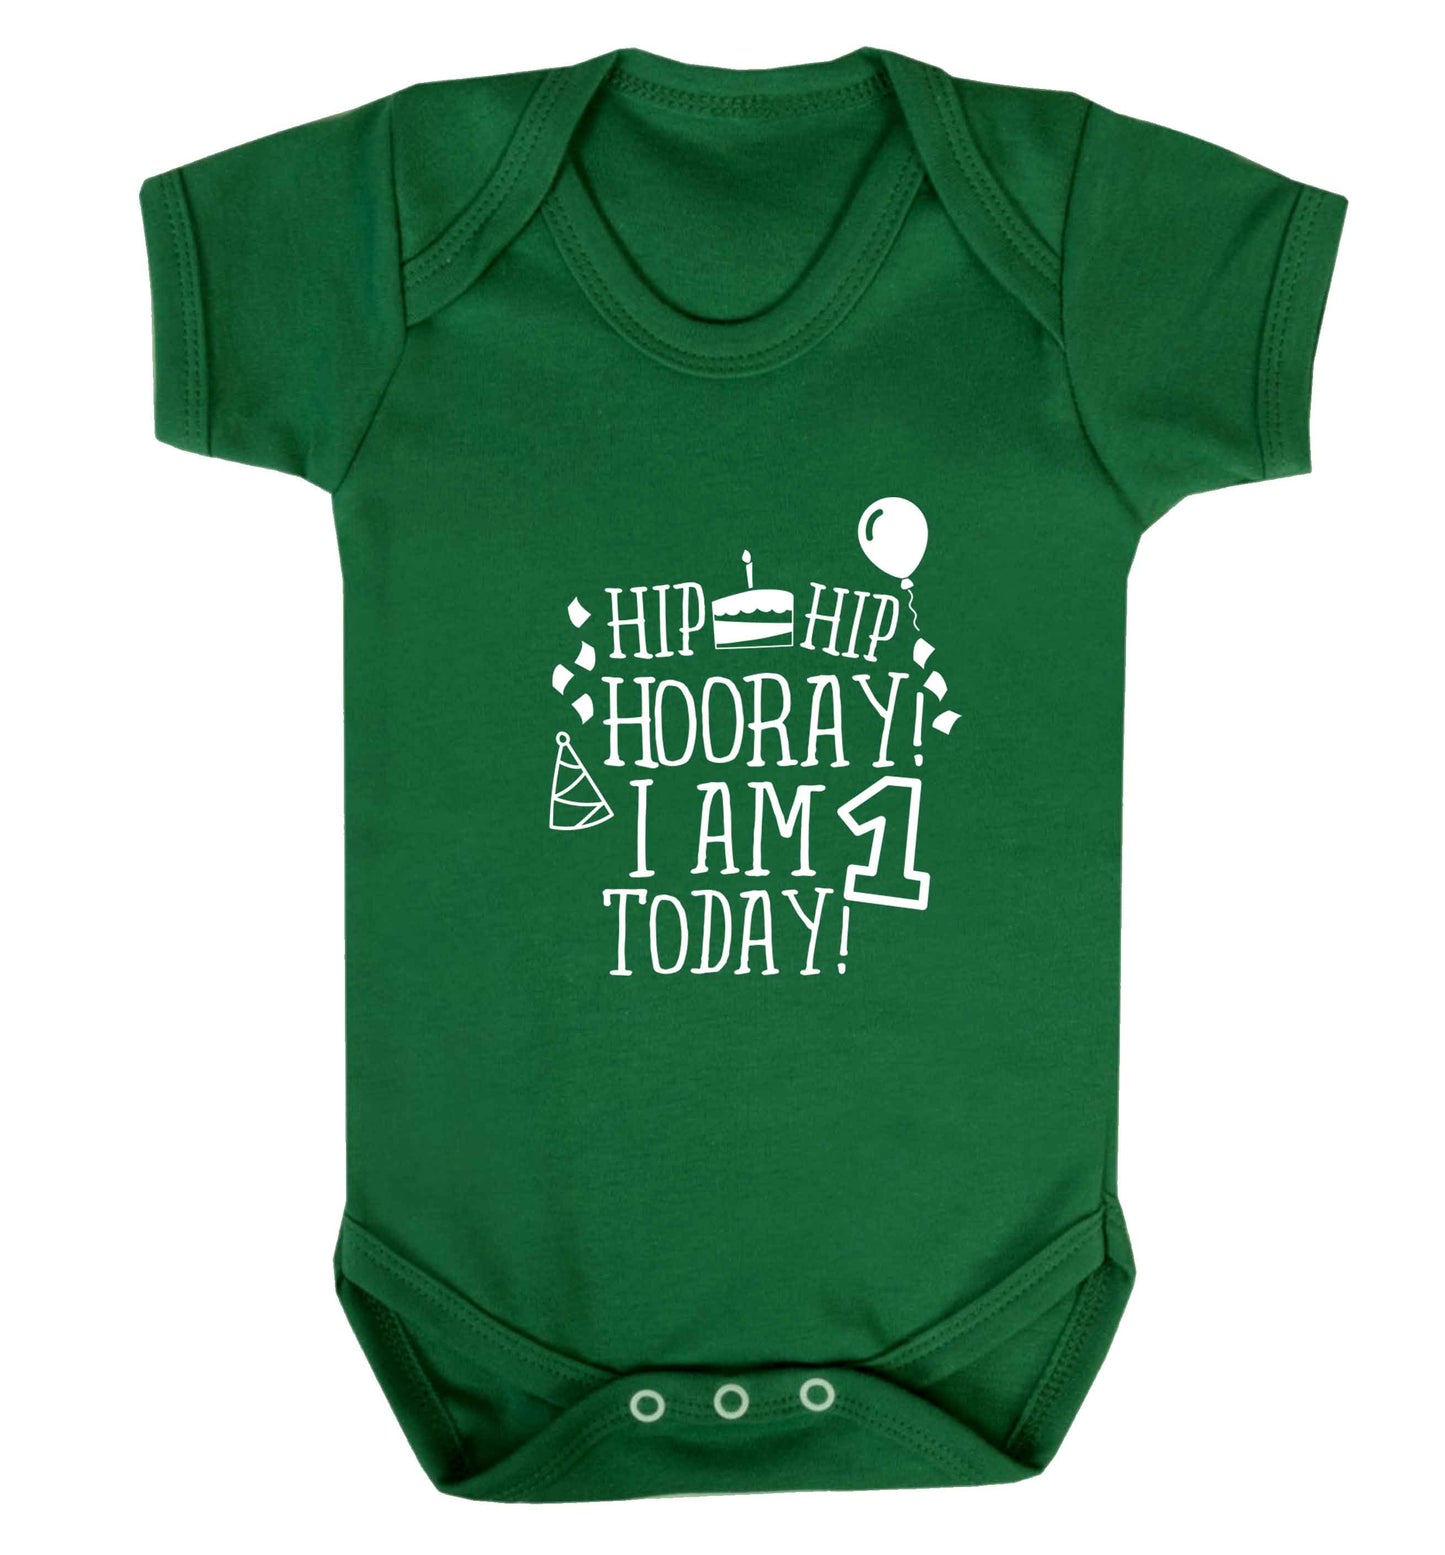 You're 2 Today baby vest green 18-24 months